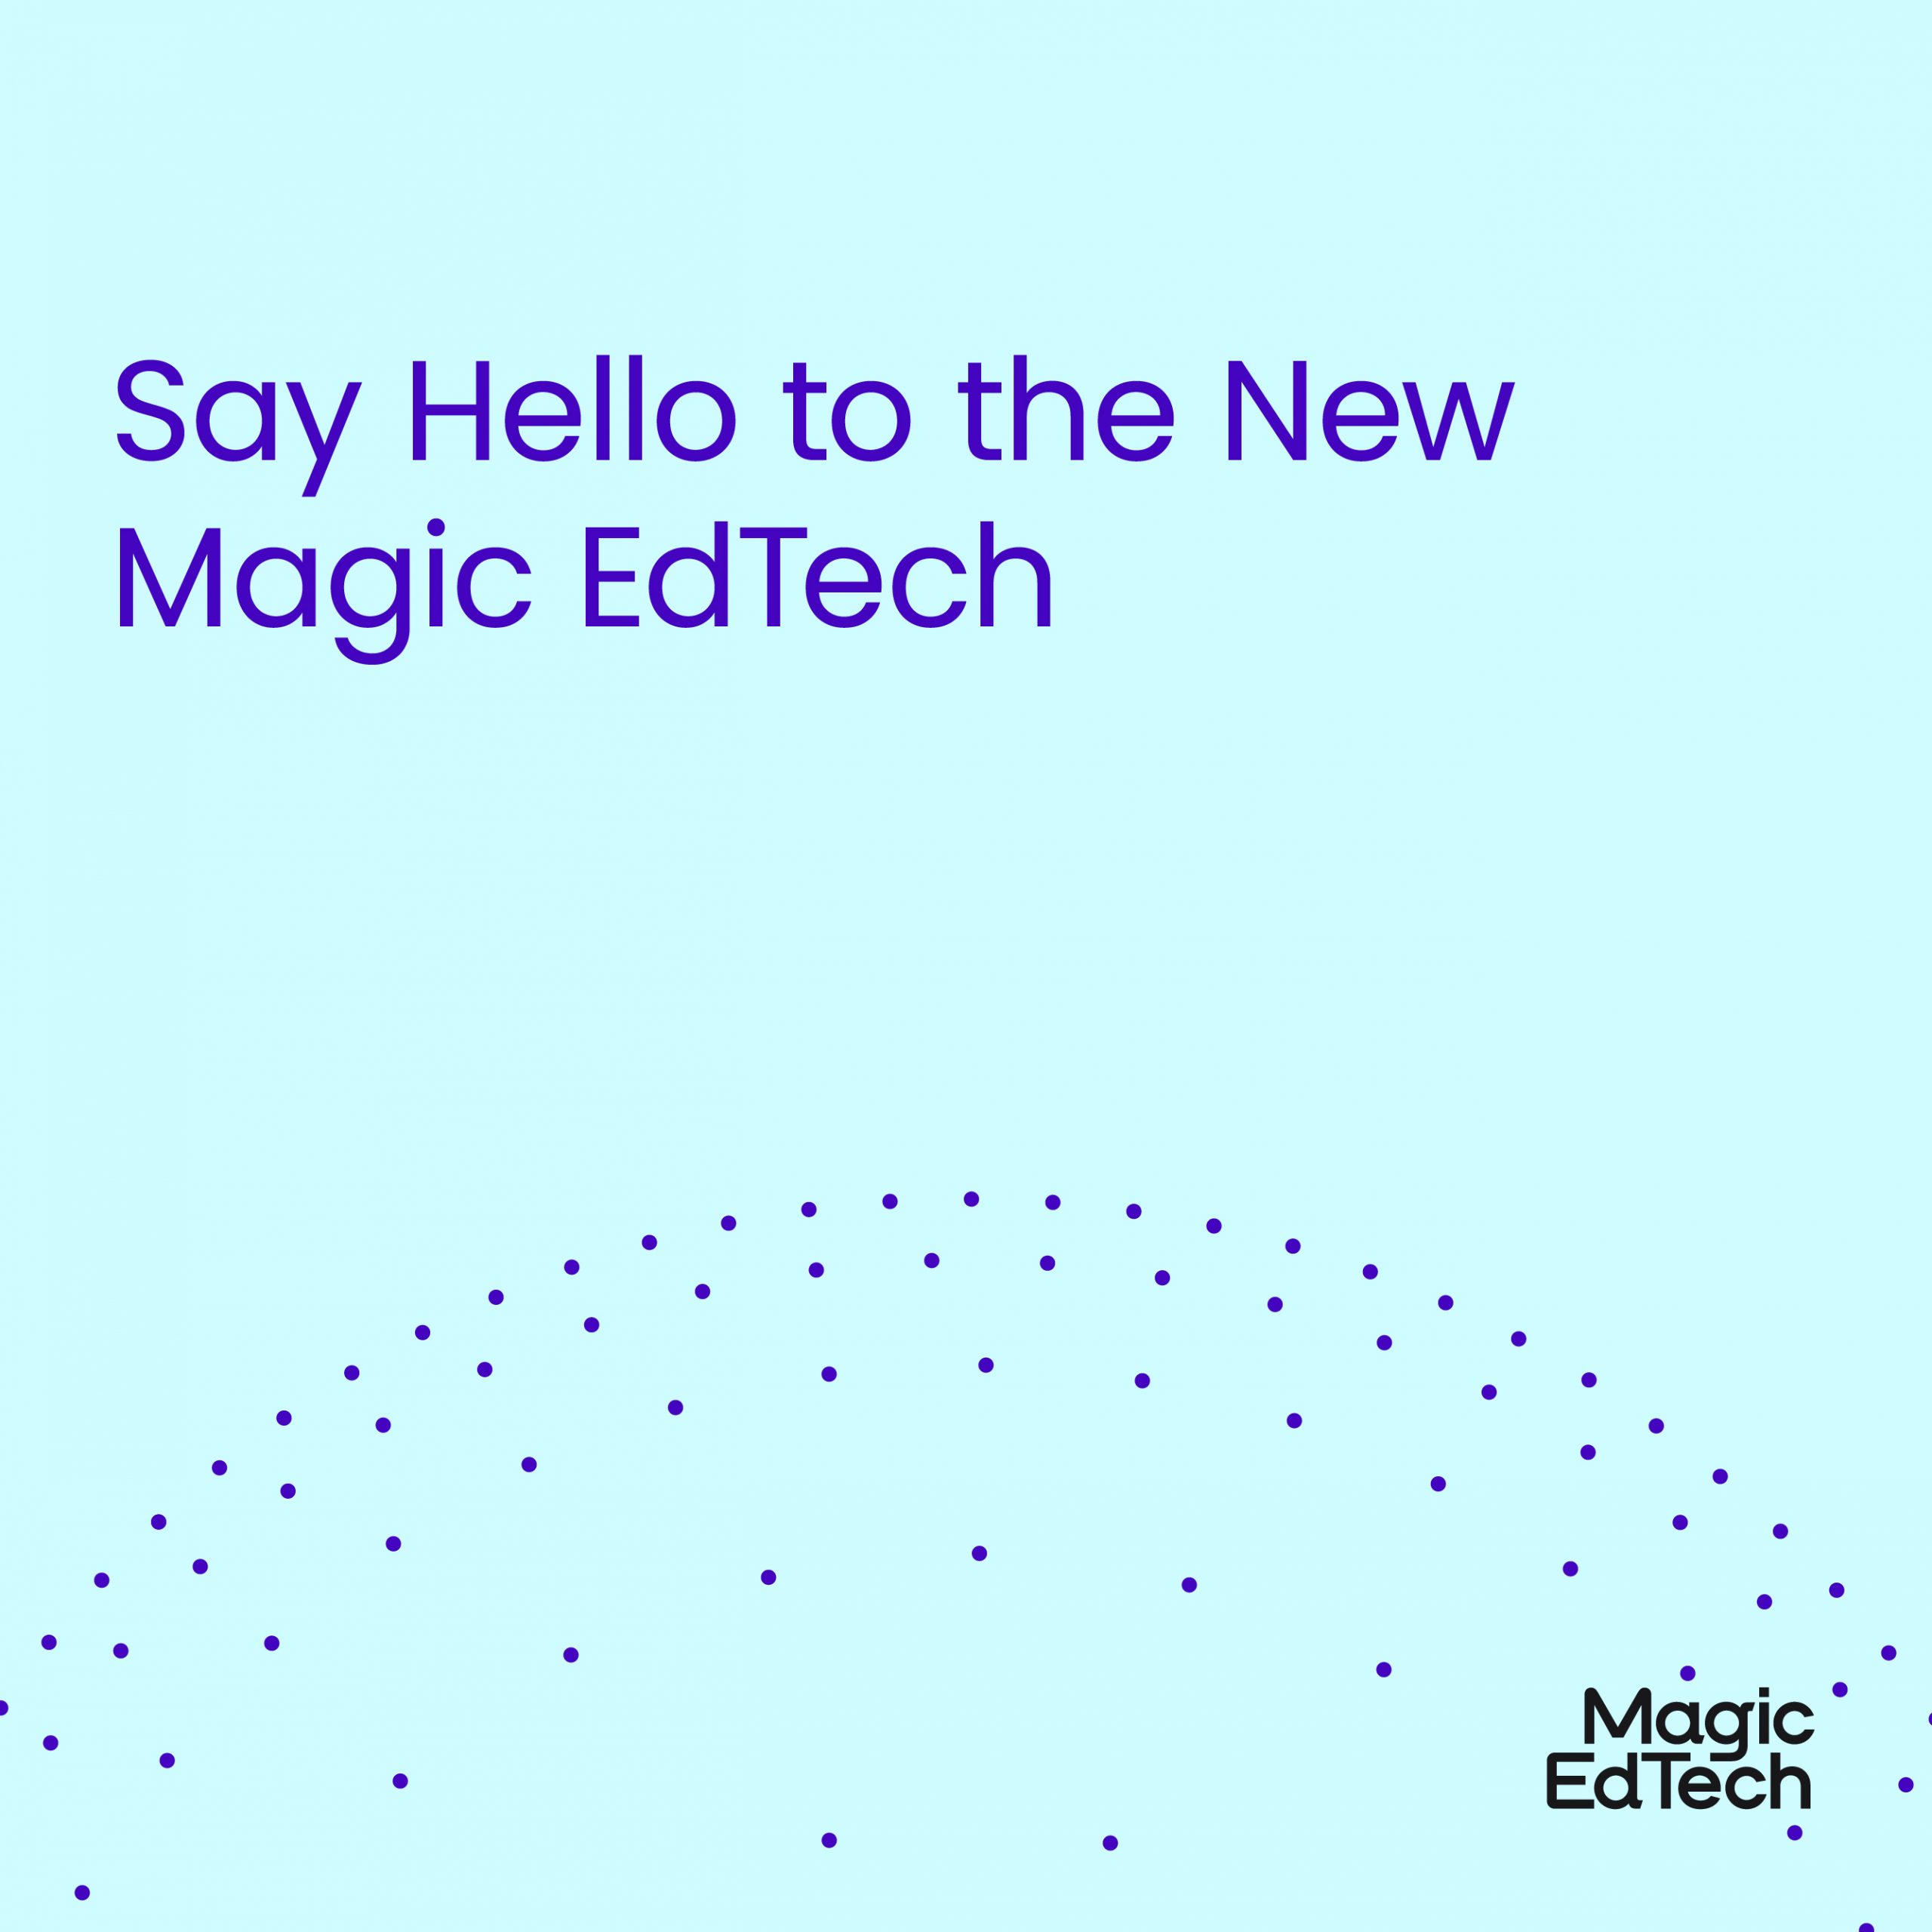 New Magic EdTech Launched